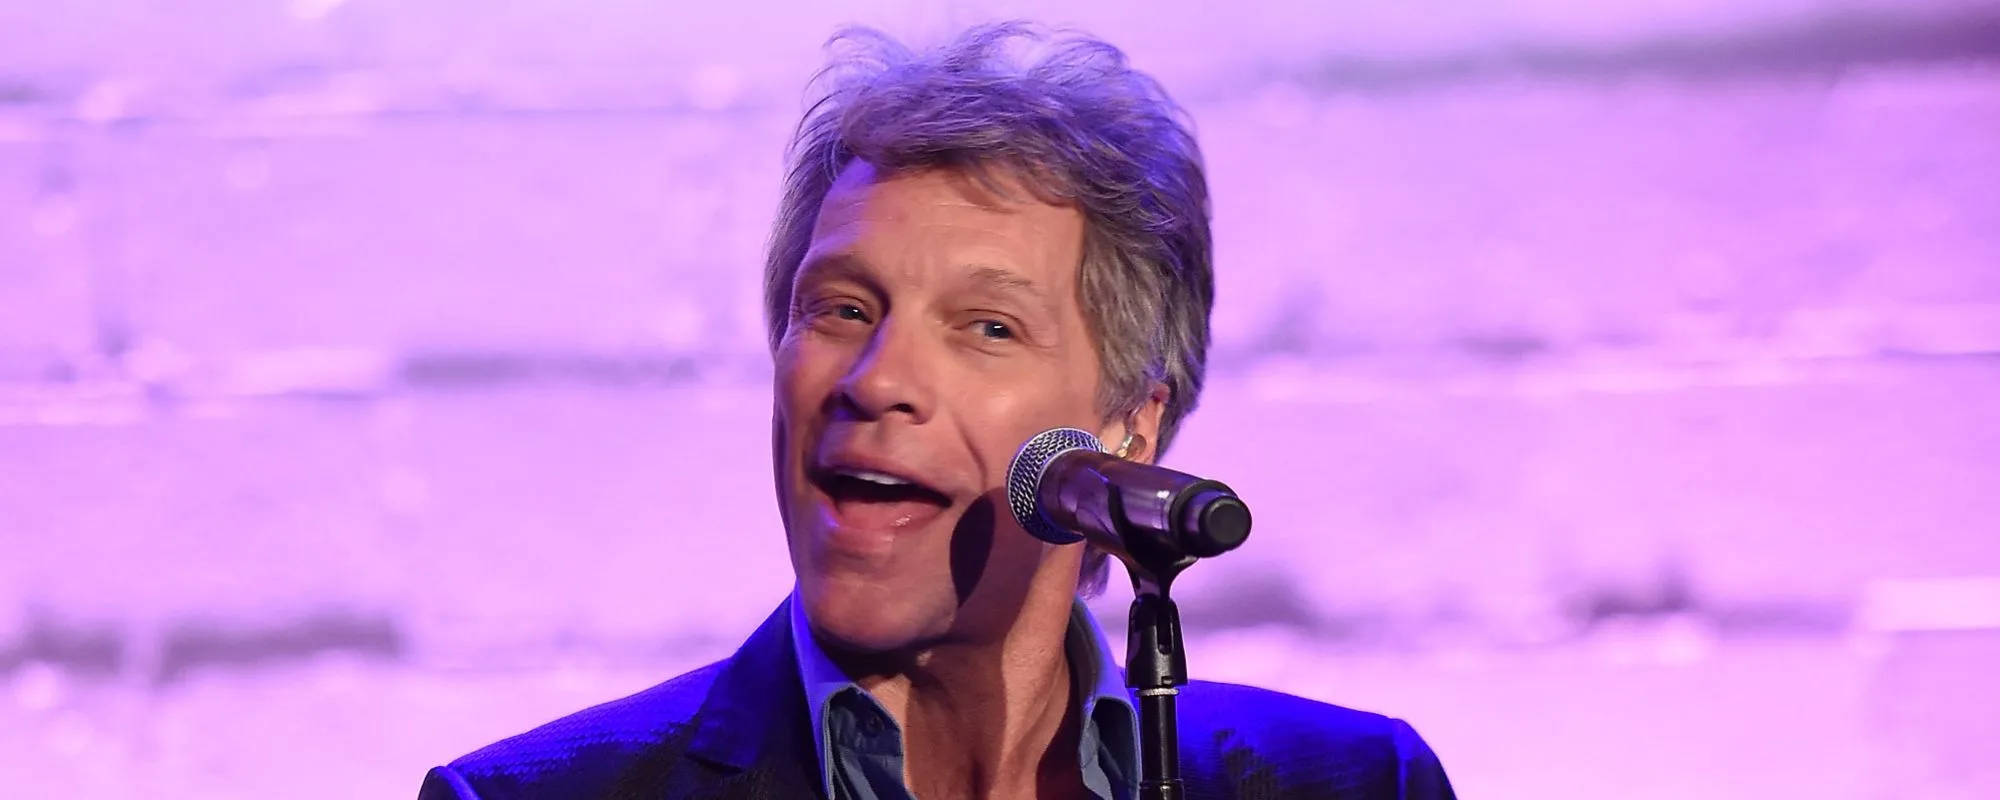 Rock Icon Jon Bon Jovi Lights up the 'American Idol' Stage as Buzz of Him Replacing Katy Perry Mounts